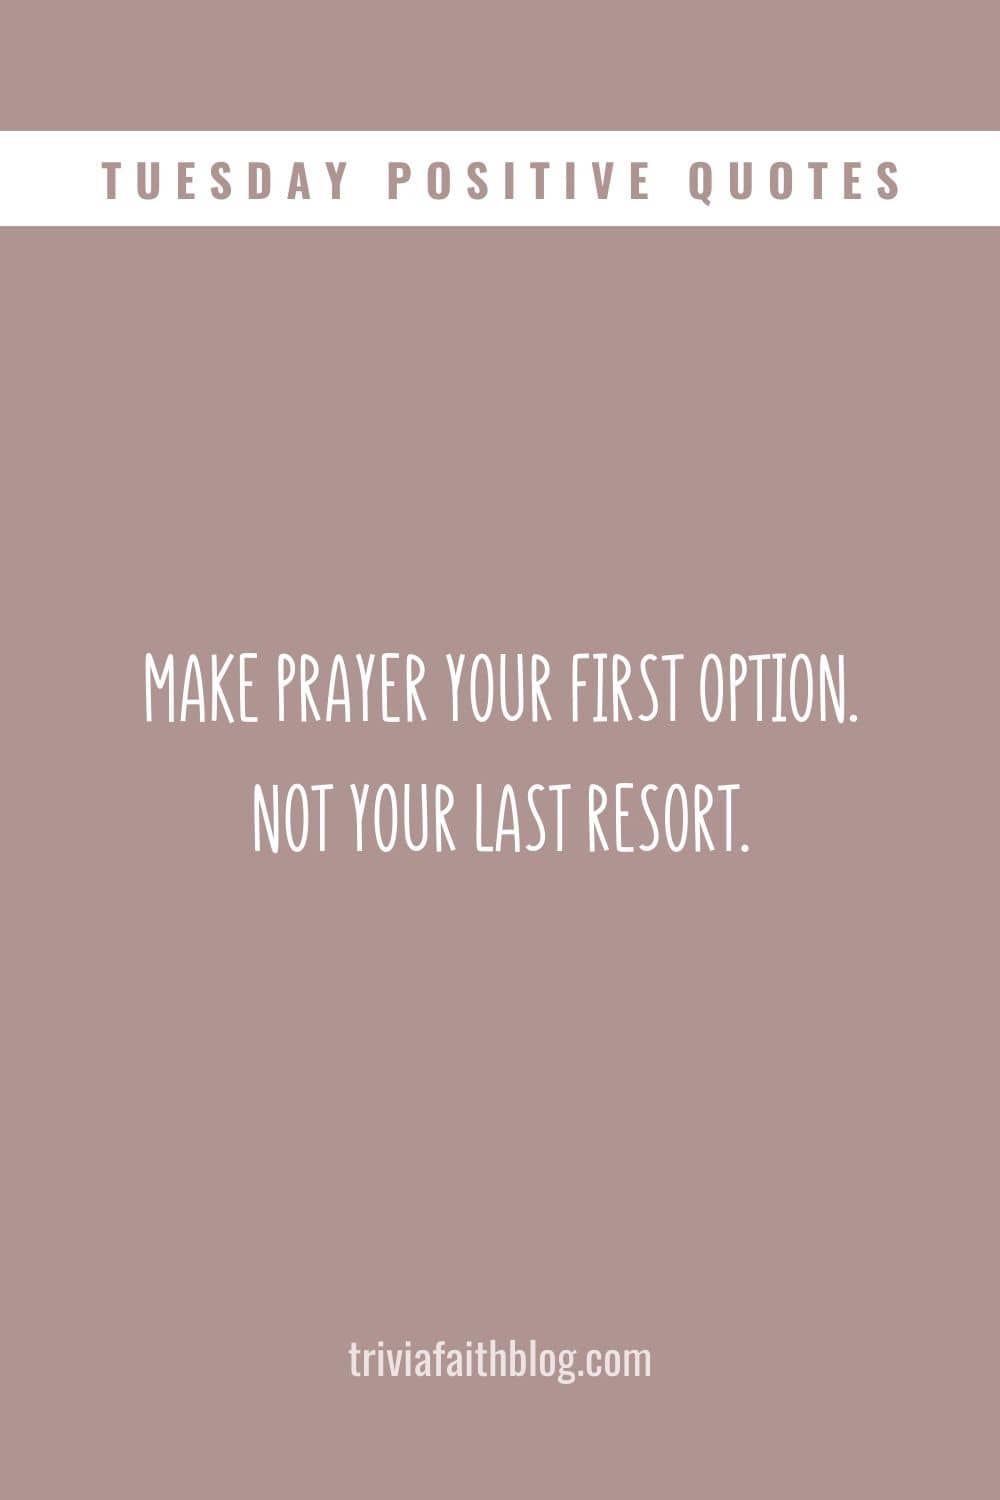 Make prayer your first option. Not your last resort